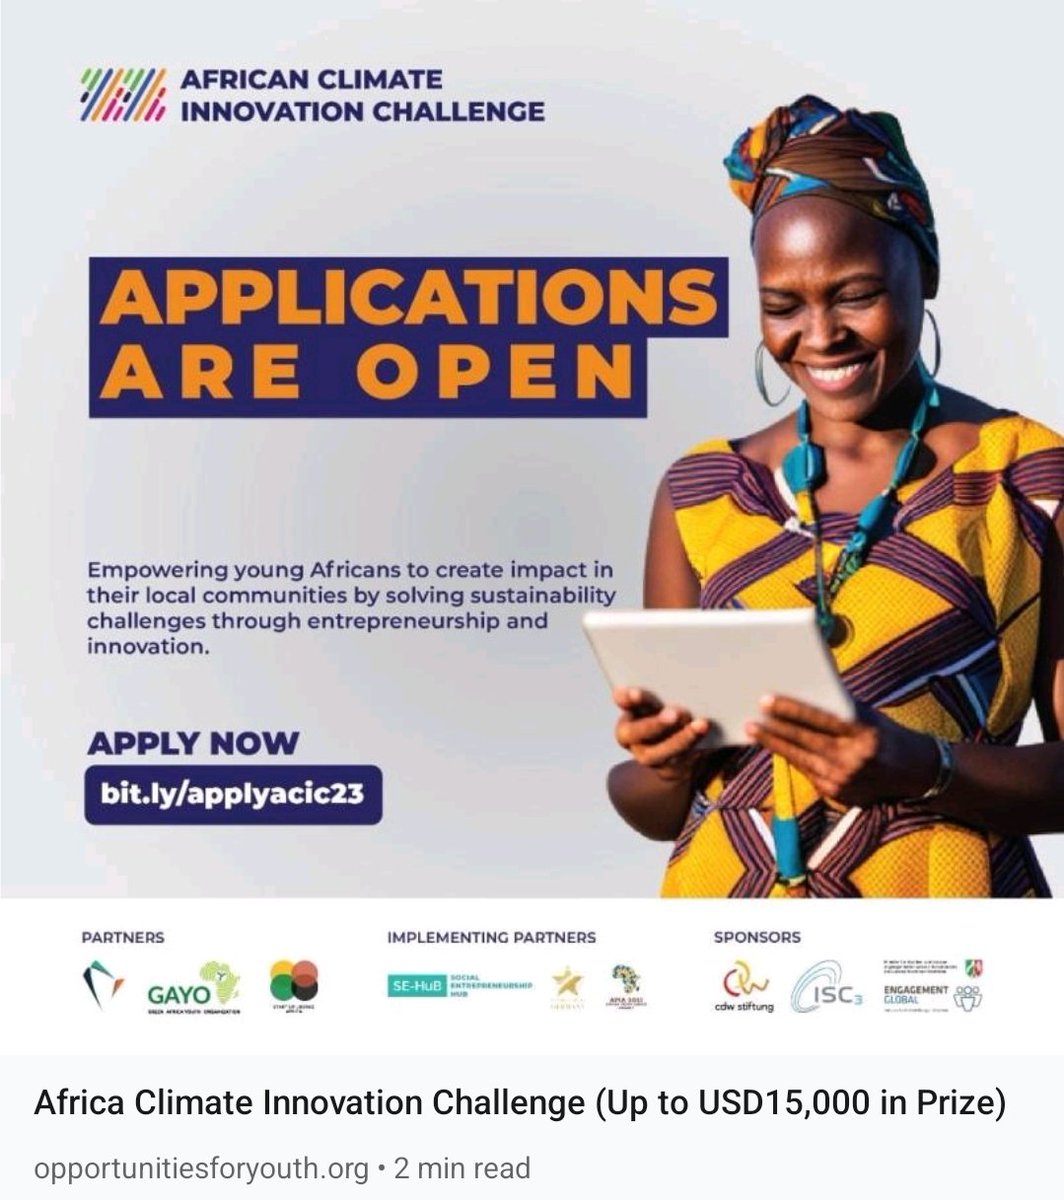 🌍 Join the African Climate Innovation Challenge (ACIC) and win up to USD15,000! Develop green ideas, get mentorship, and pitch at the African Climate Summit. Open to African teams of 2-6 members aged 18-35. Apply now! Application link for more details: rb.gy/jf75d